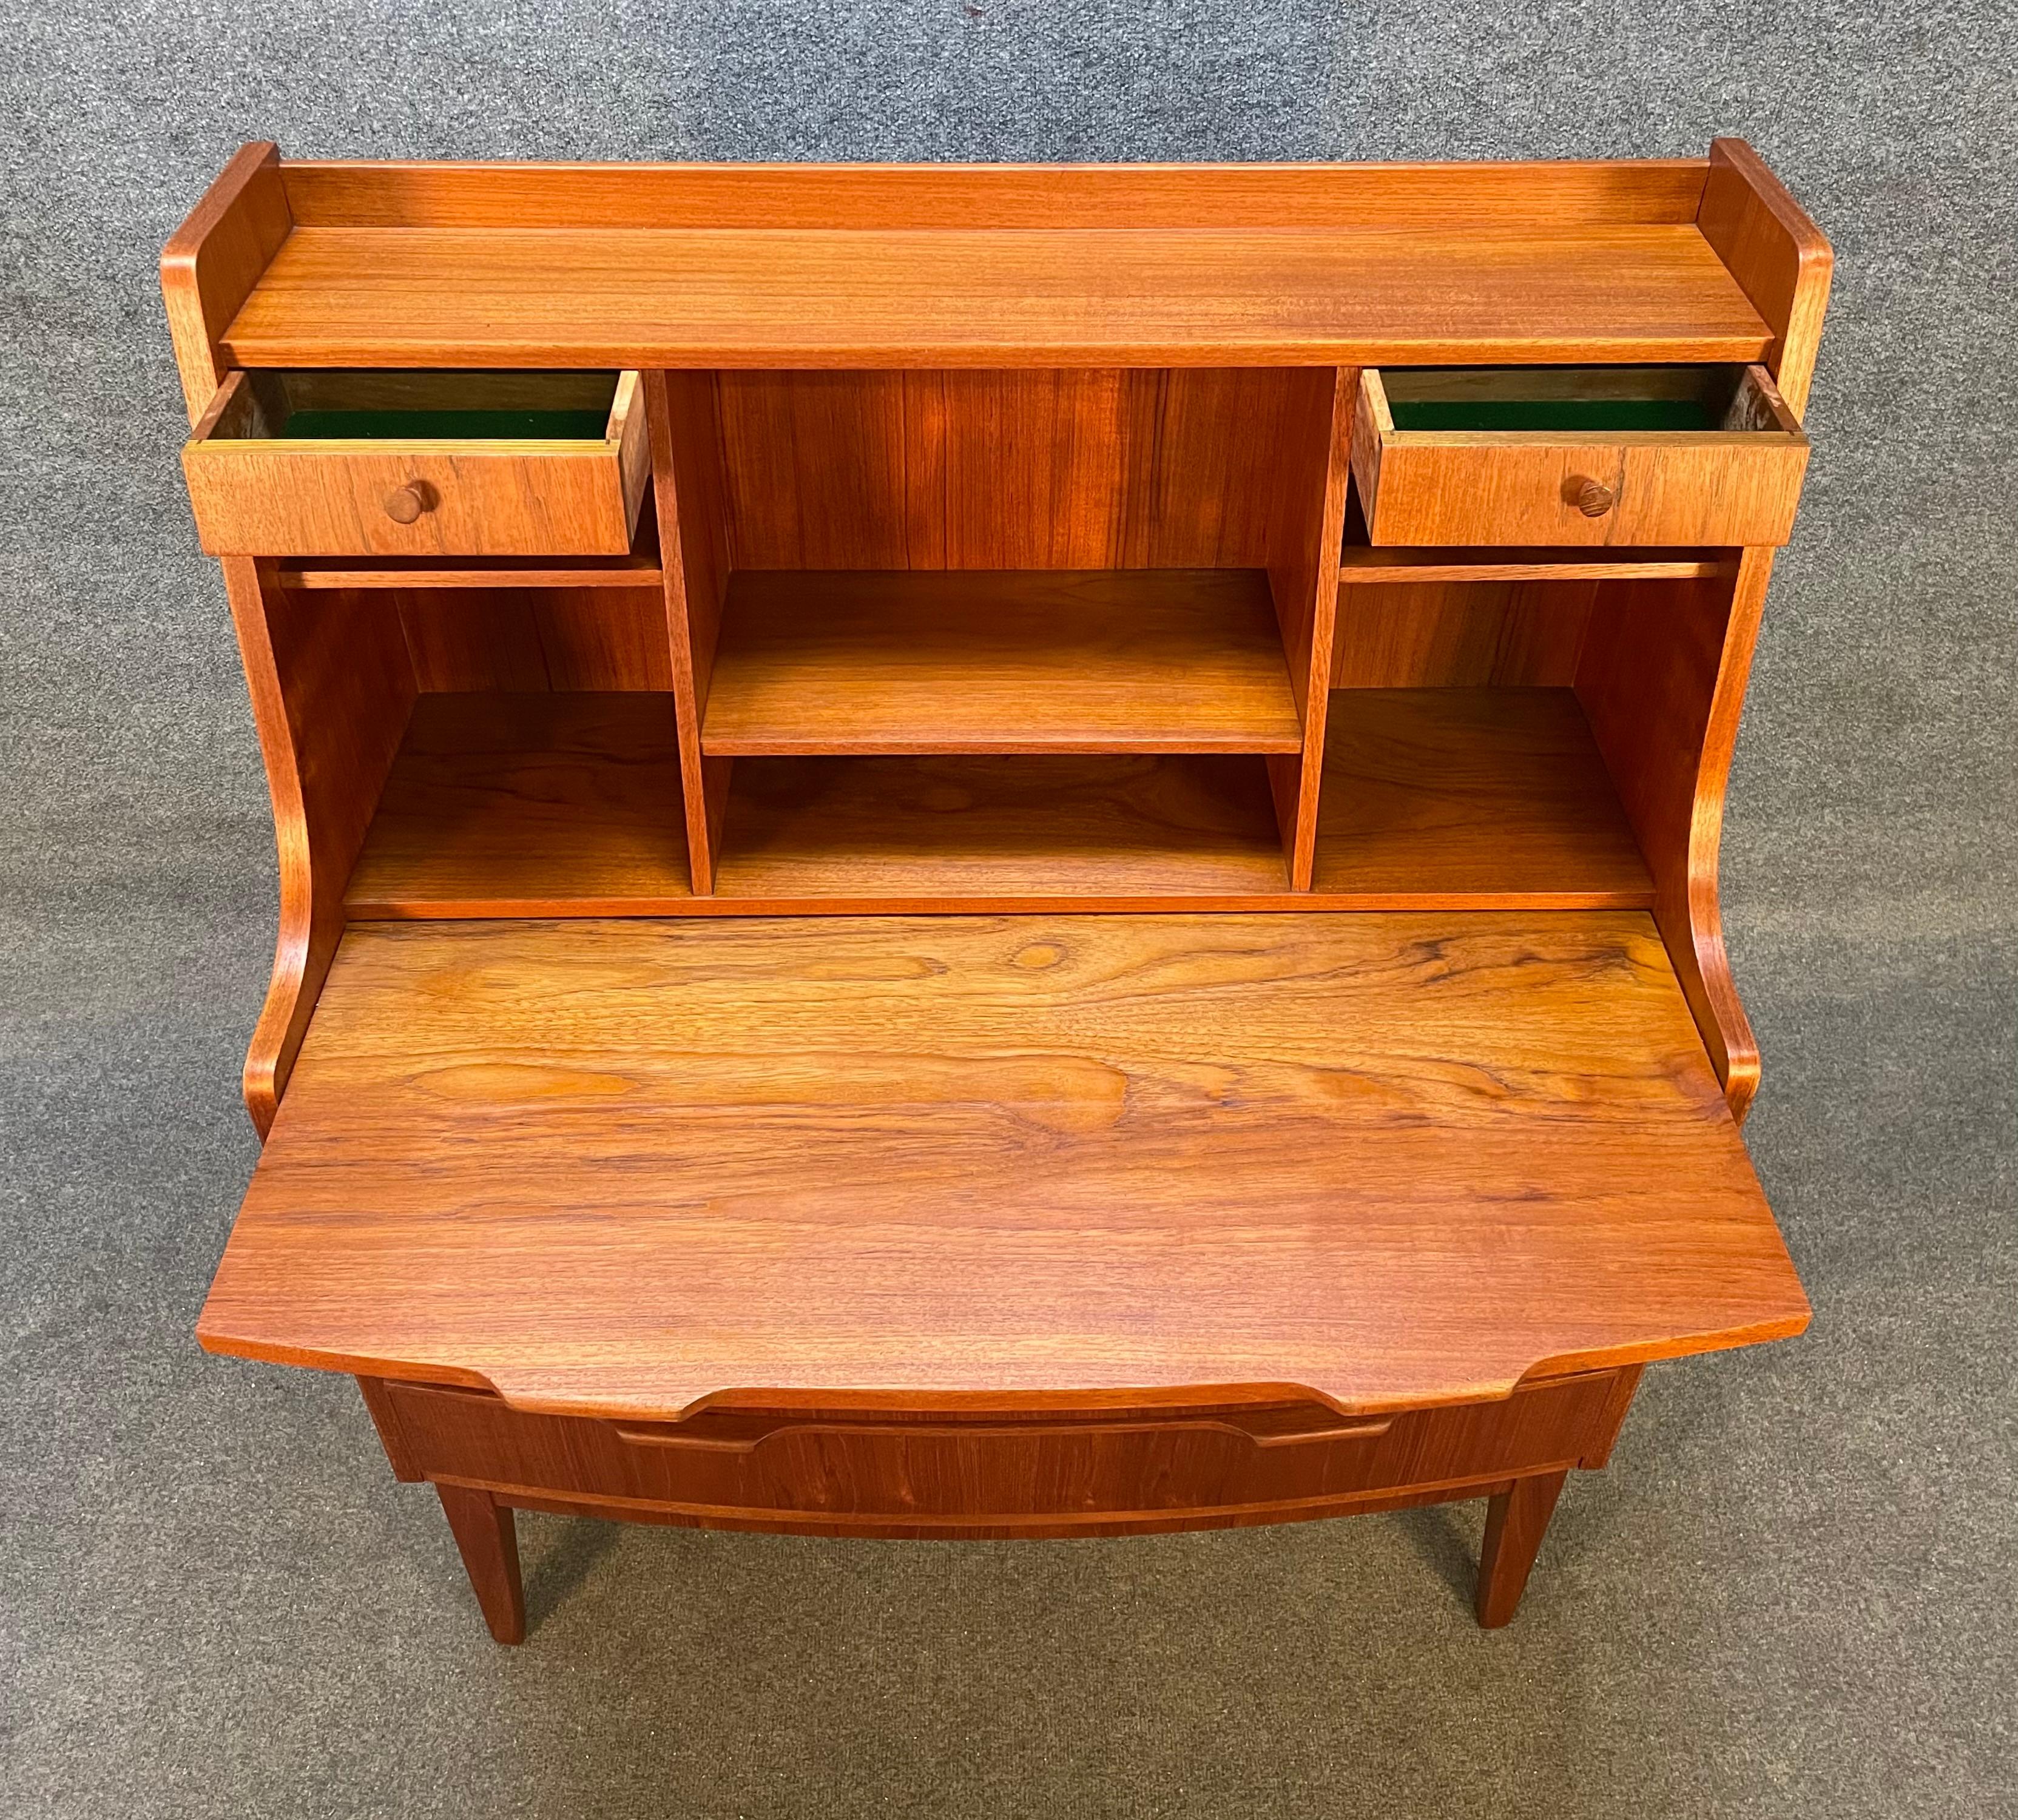 Here is a beautiful Scandinavian modern teak secretary desk manufactured by Christian Larsen in Denmark in the 1960's.
This exquisite piece, recently imported from Europe to California before its refinishing, features a vibrant wood grain, a bowed